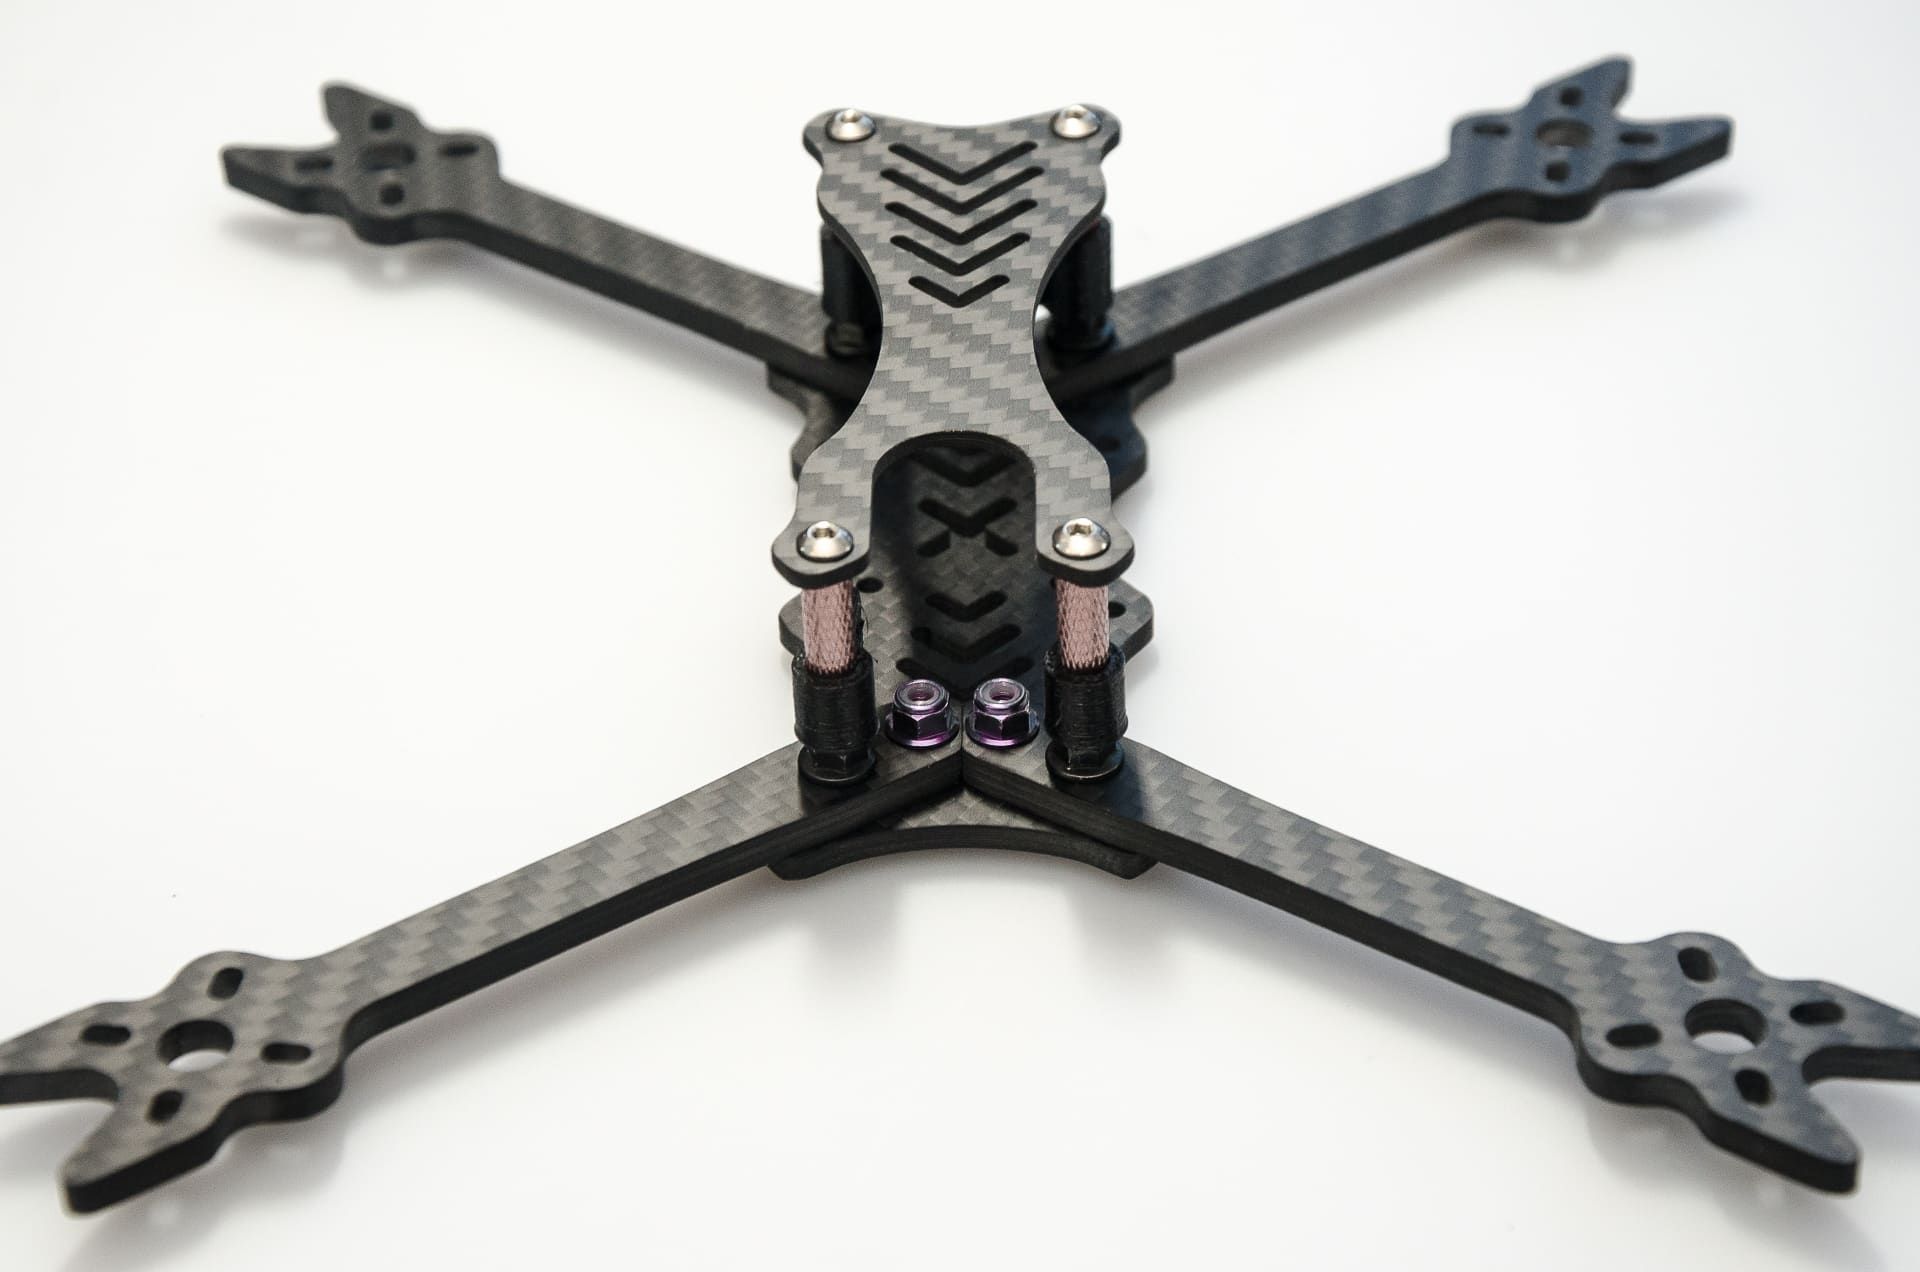 The Latest Drone Reviews